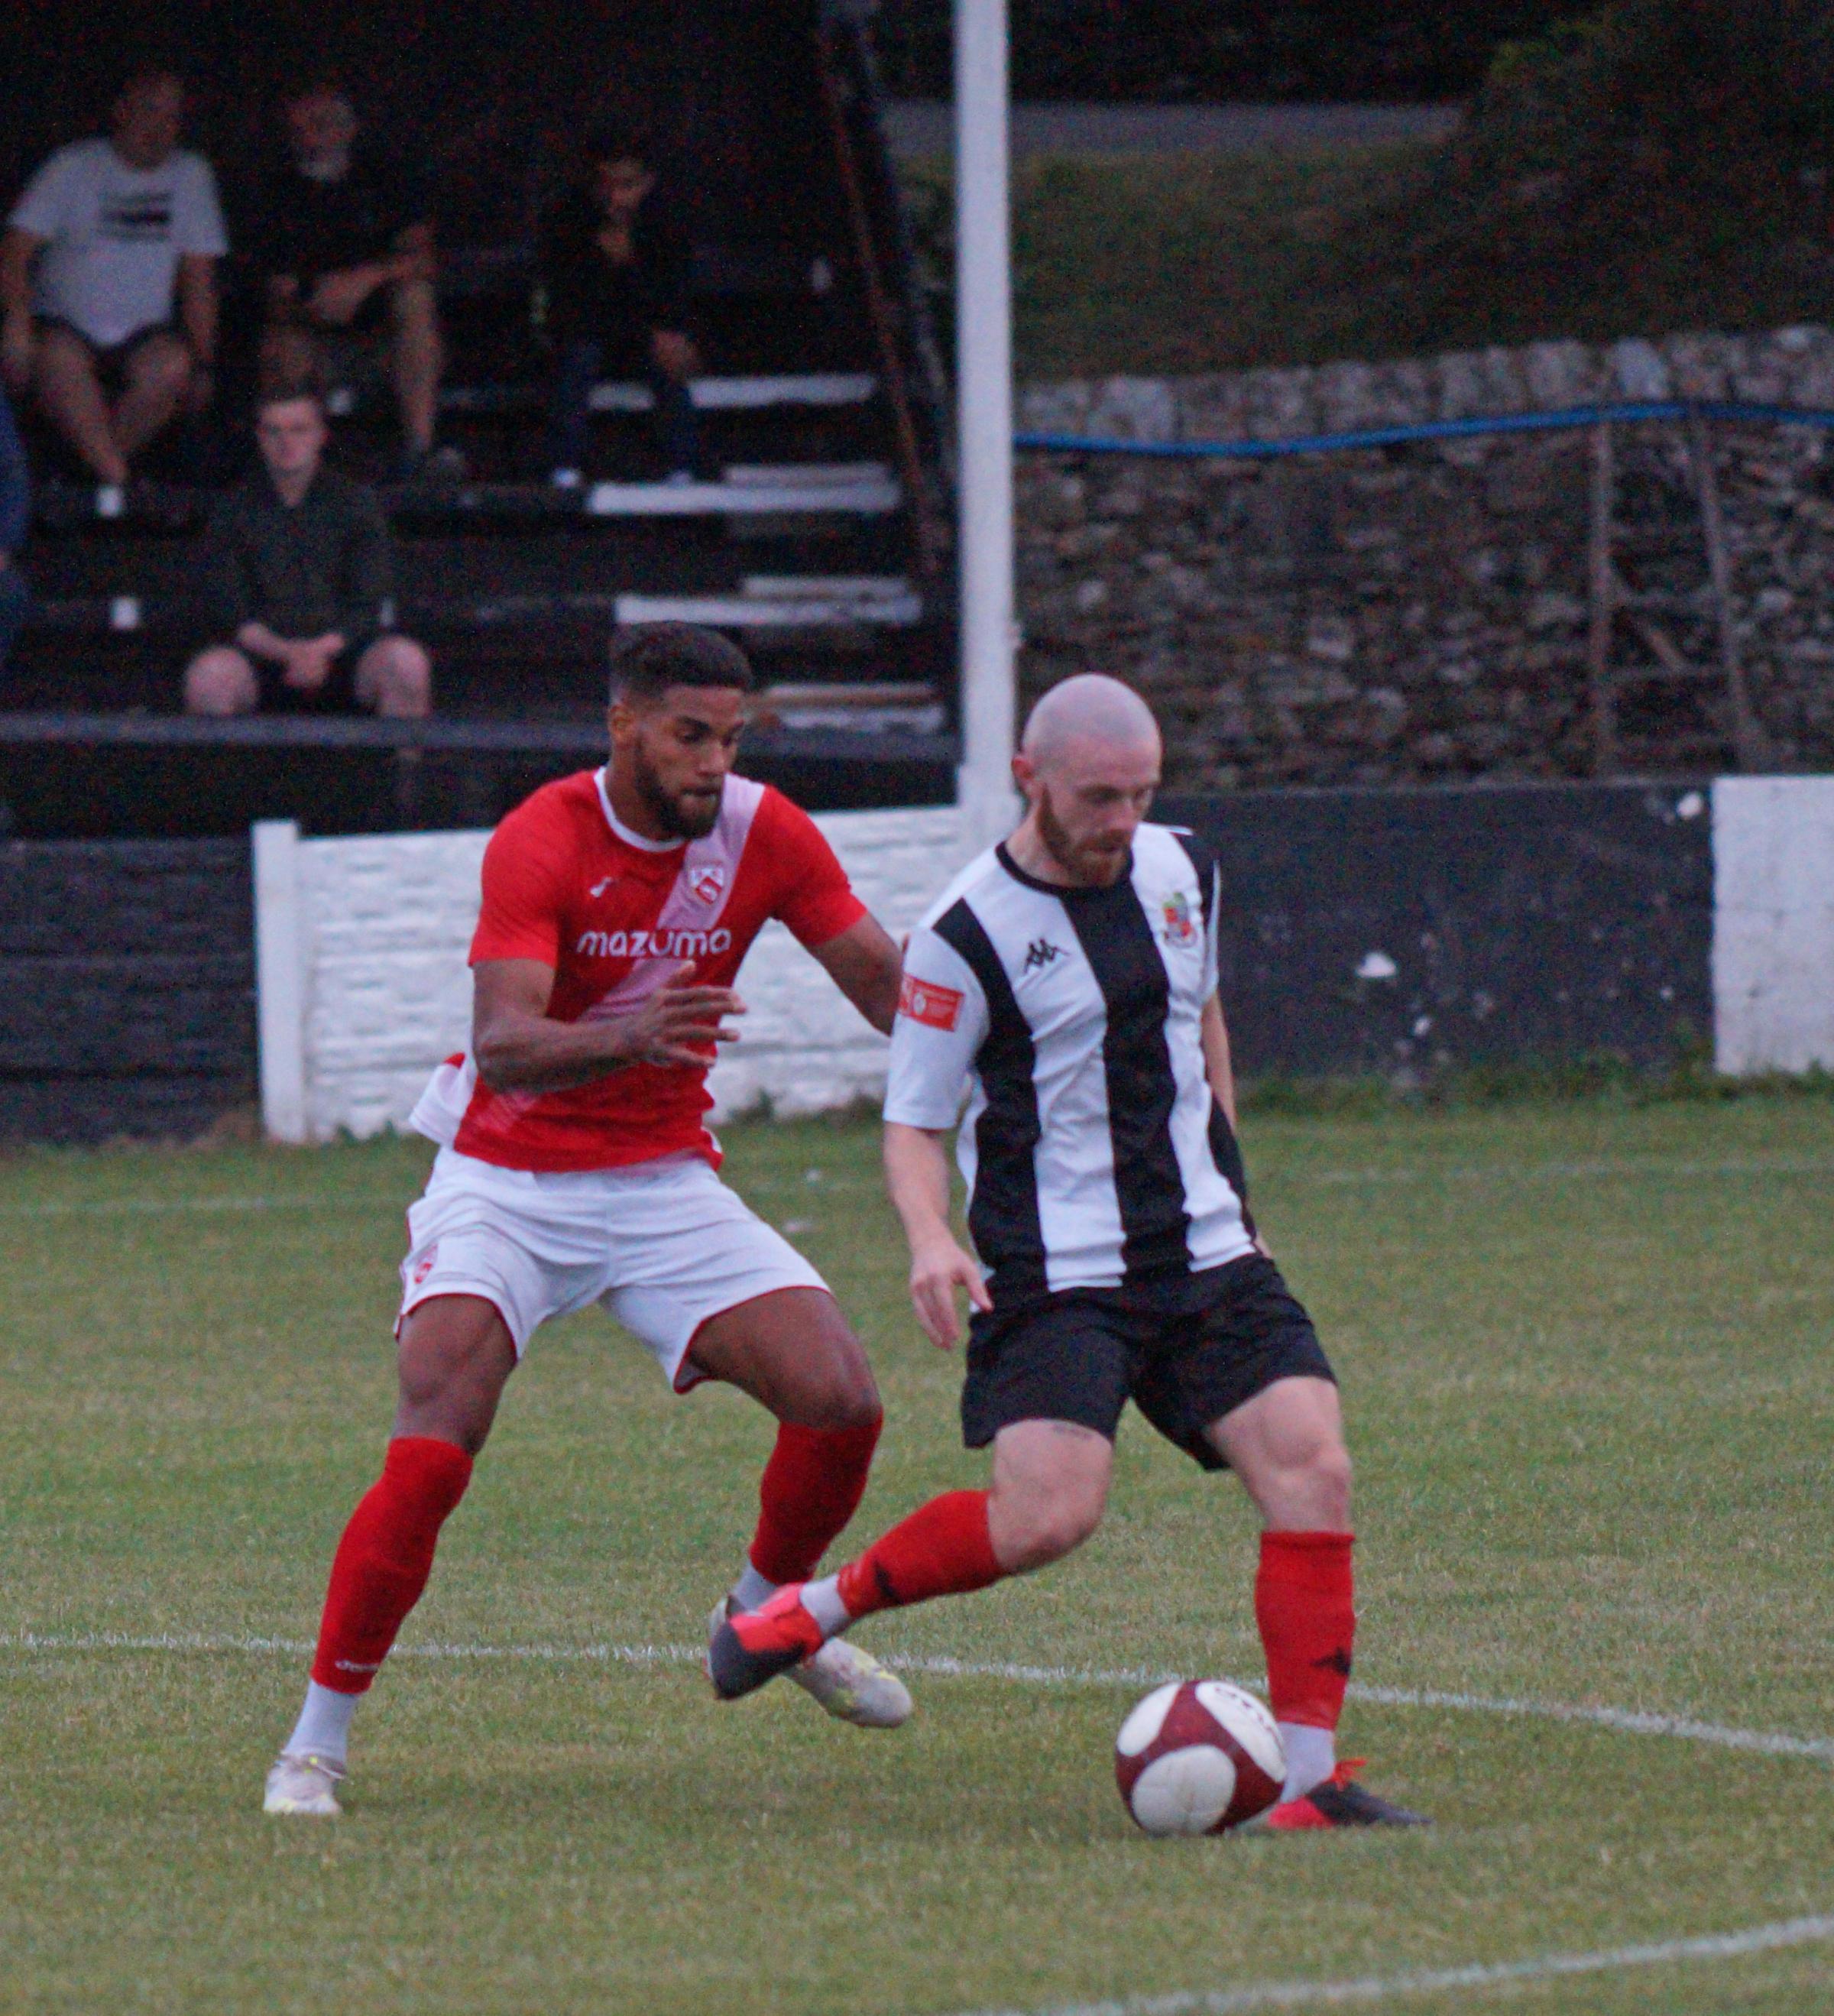 MATCH: Kendal take on Carlisle United and Morecambe’s First team in pre-season friendly matches (Report and photographs by Richard Edmondson)